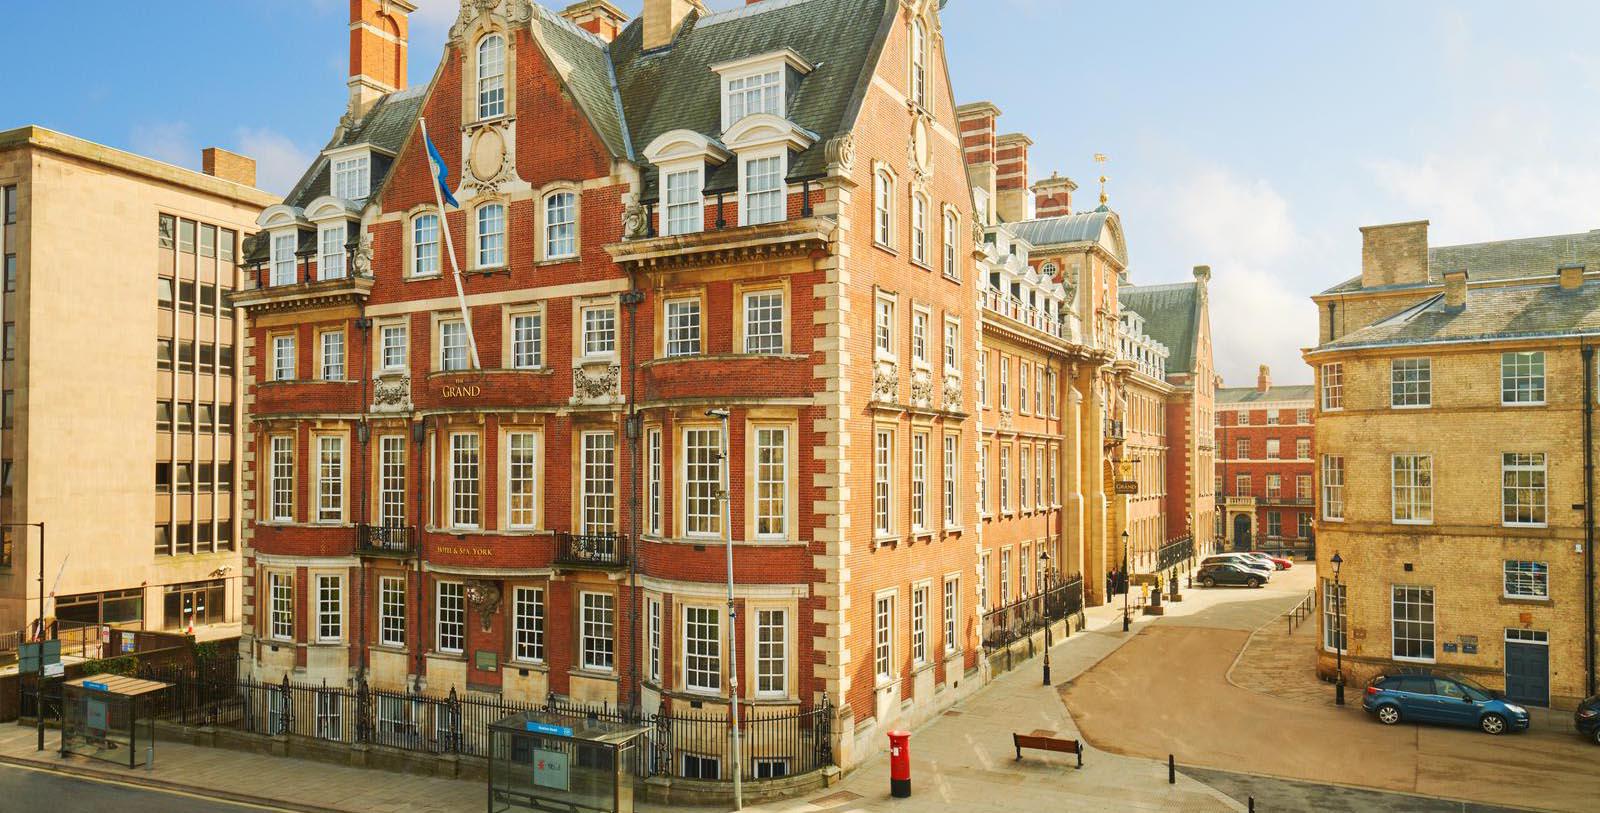 Discover the Edwardian architecture of this extraordinary holiday destination.